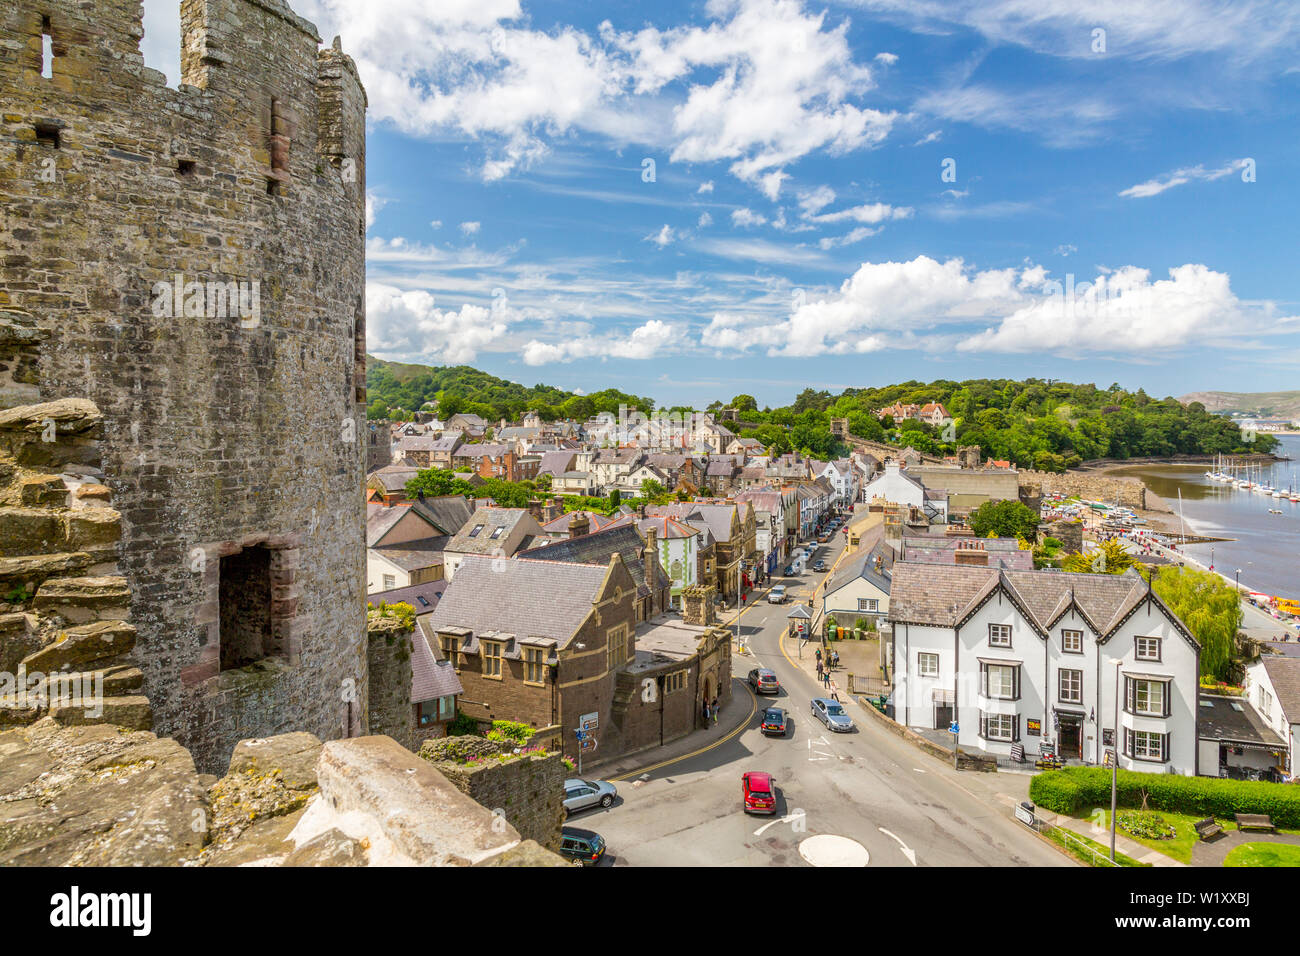 The town of Conwy and the River Conwy viewed from ruins of Conwy Castle, now a popular tourist attraction, Wales, UK Stock Photo